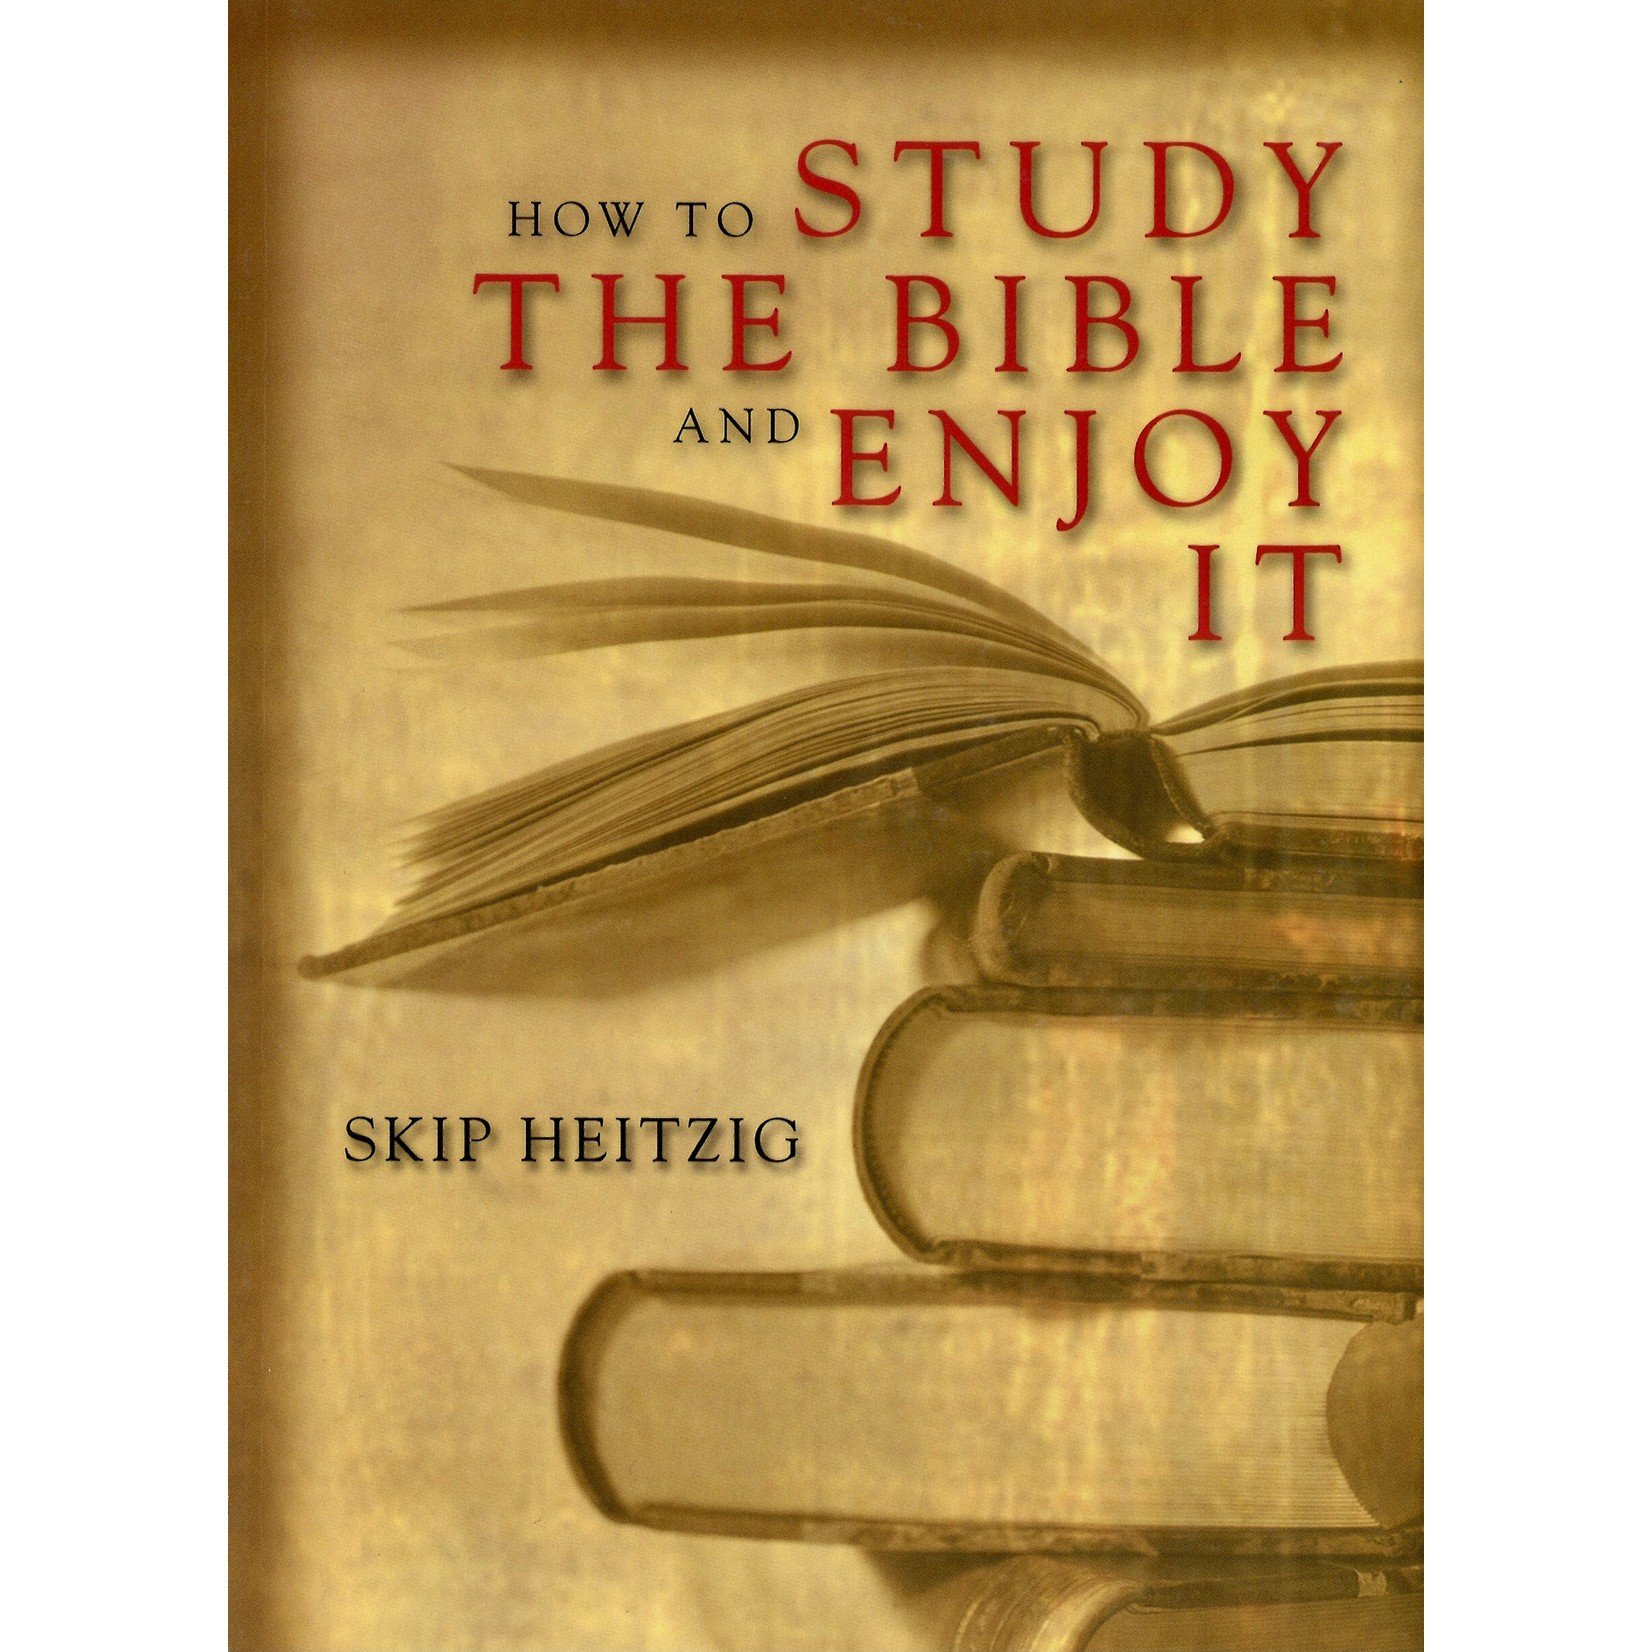 HOW TO STUDY THE BIBLE AND ENJOY IT